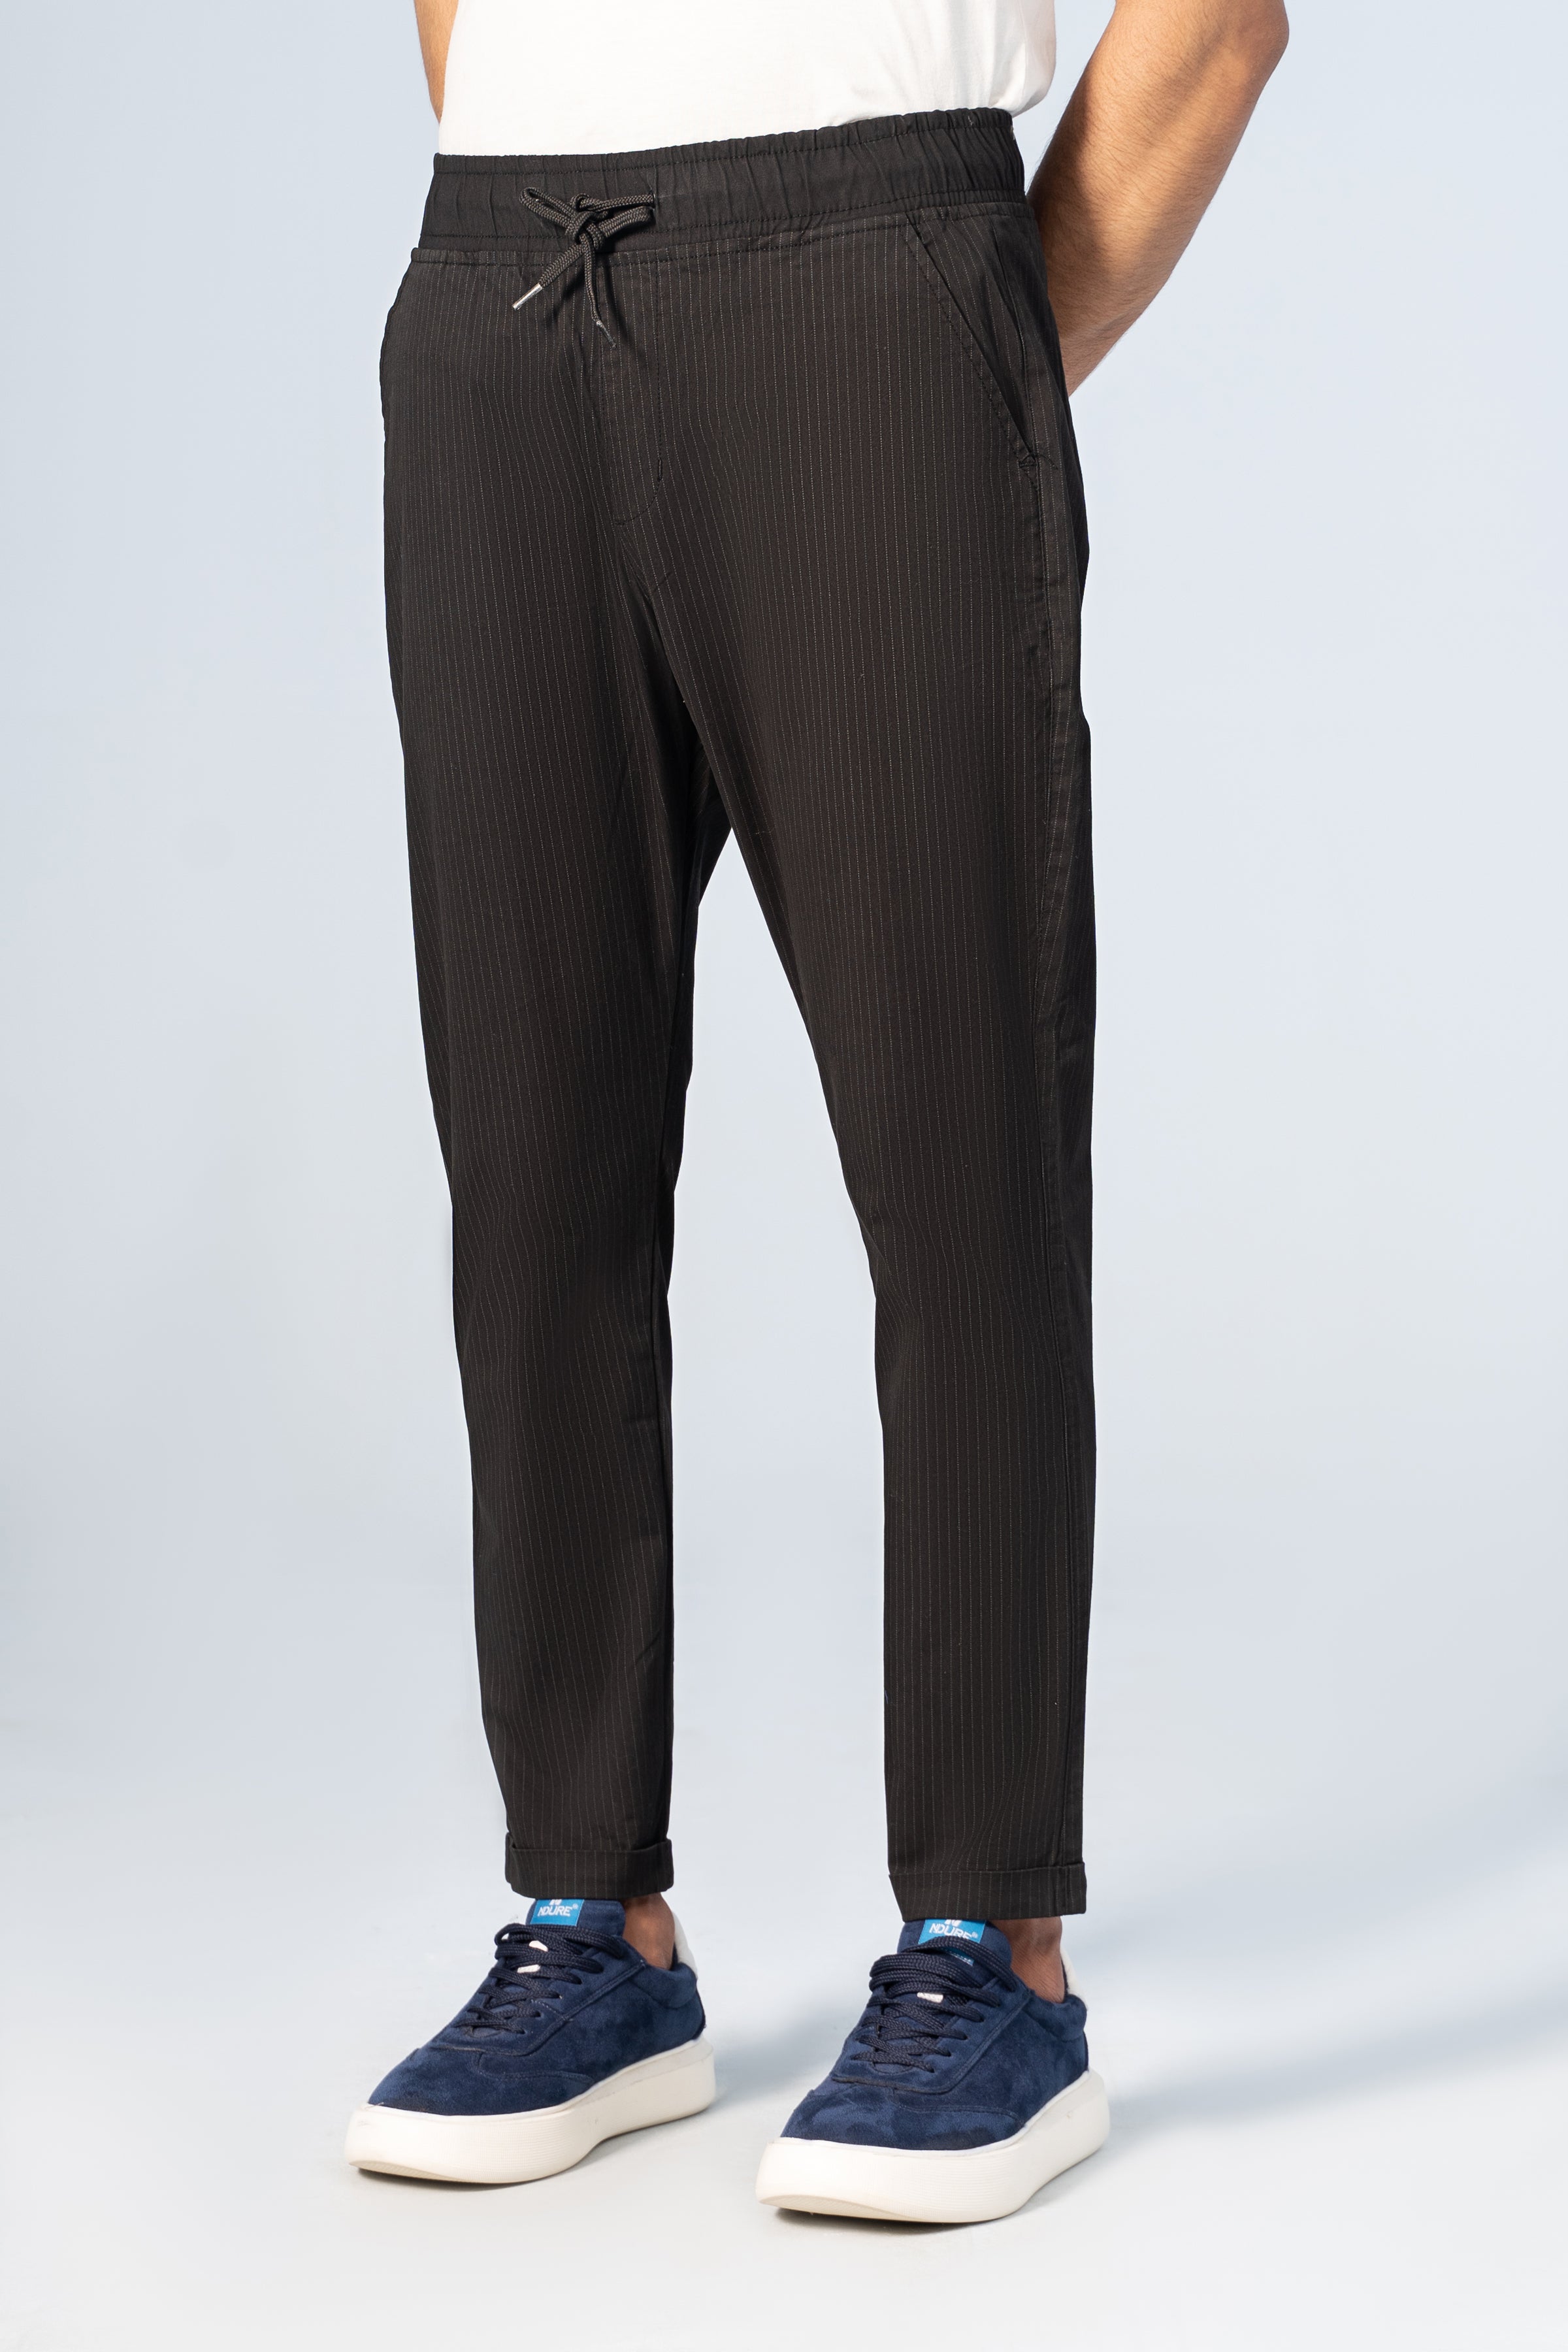 PRINTED JOGGER TROUSER BLACK - Charcoal Clothing